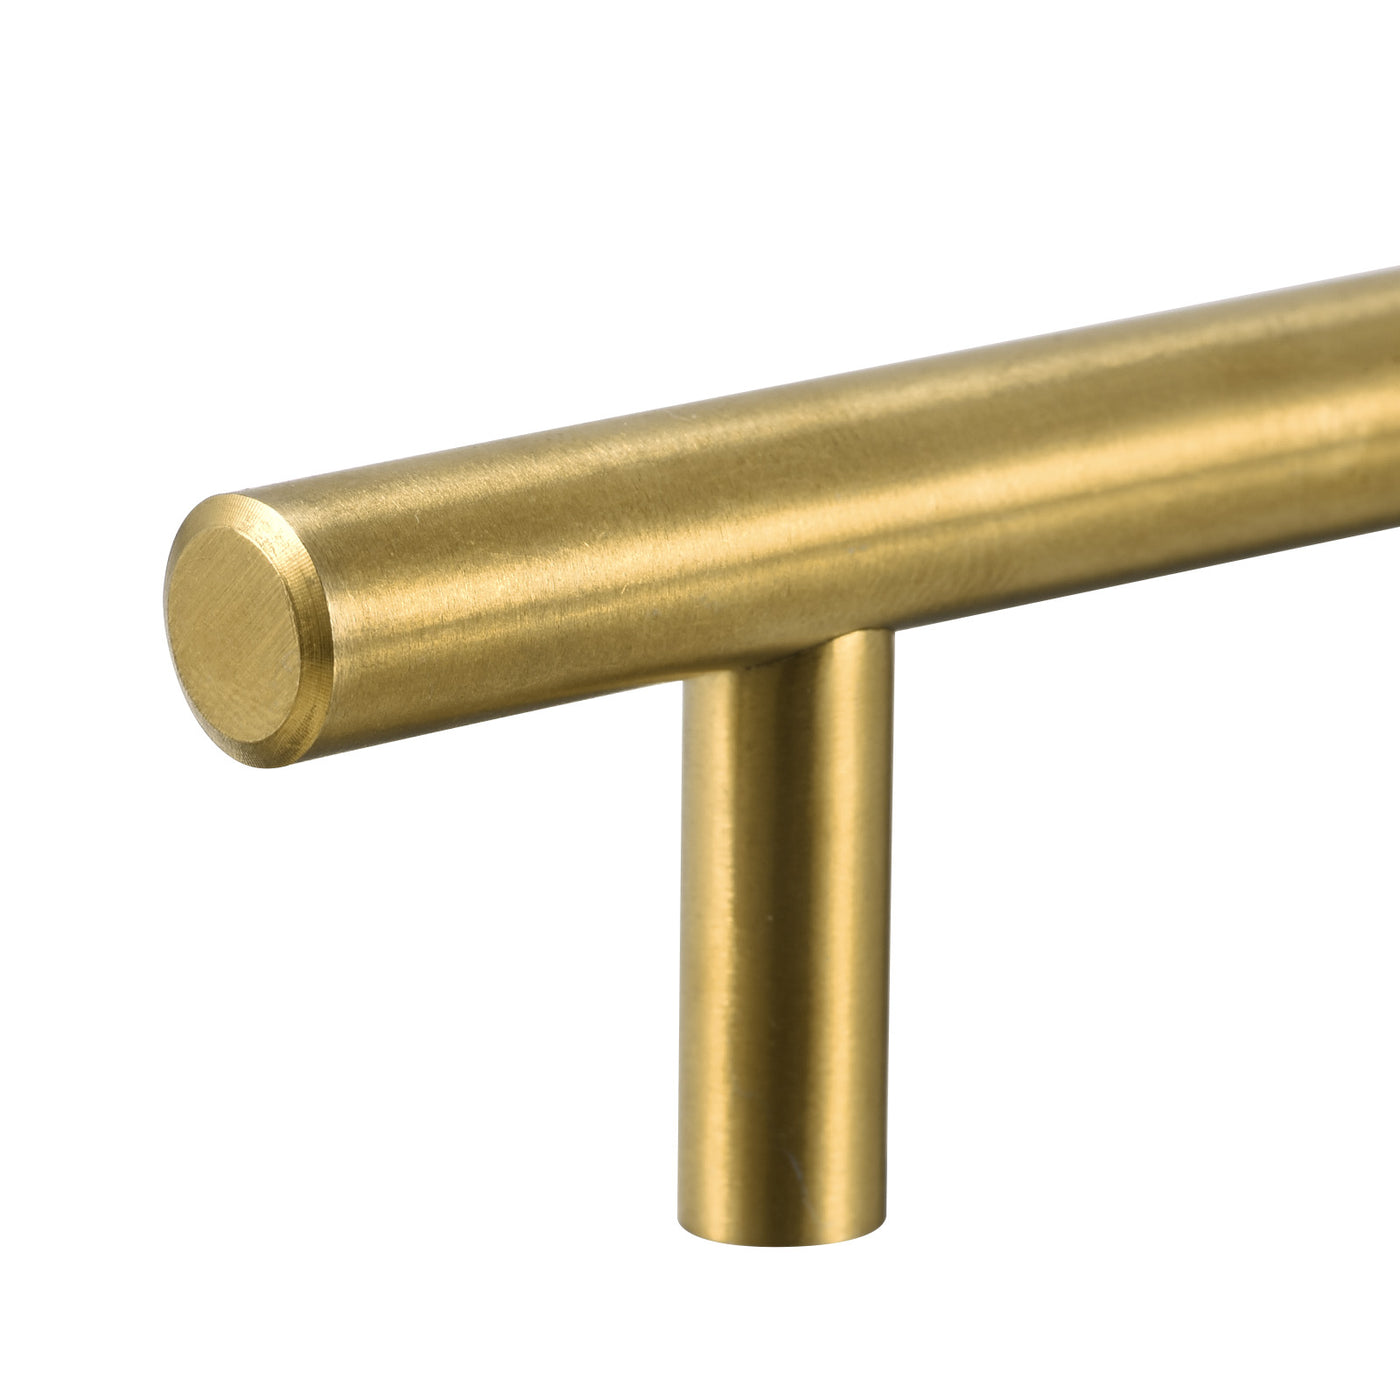 uxcell Uxcell T Bar Pull Handle, 14"(350mm) Length 10mm Dia Stainless Steel Cabinet Pulls 8.8"(224mm) Hole Center Distance Gold Tone